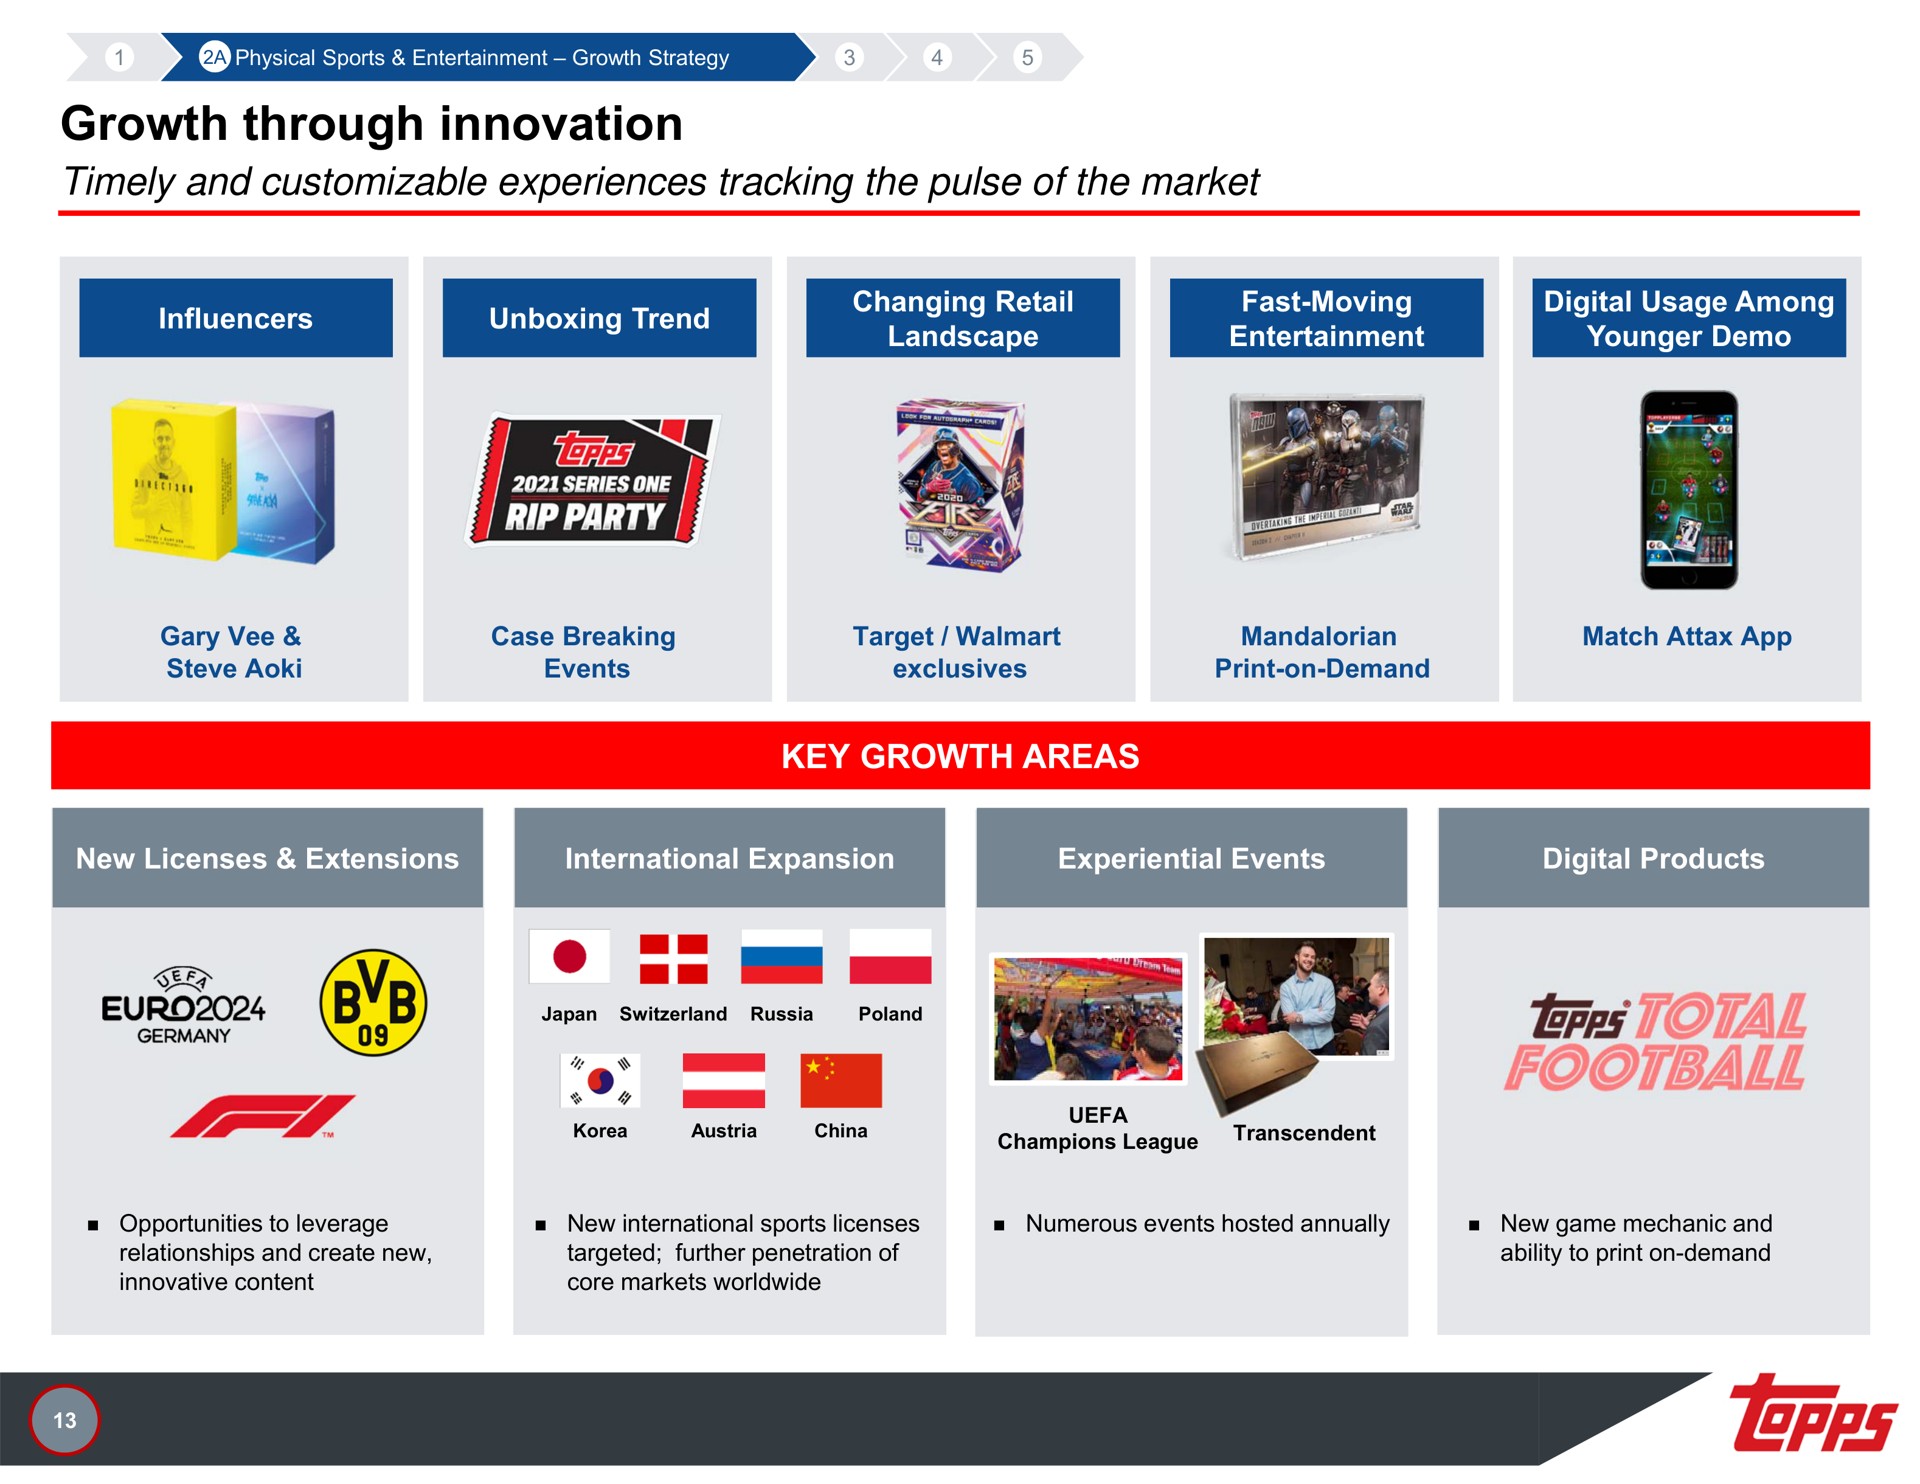 growth through innovation timely and experiences tracking the pulse of the market ide ens | Topps